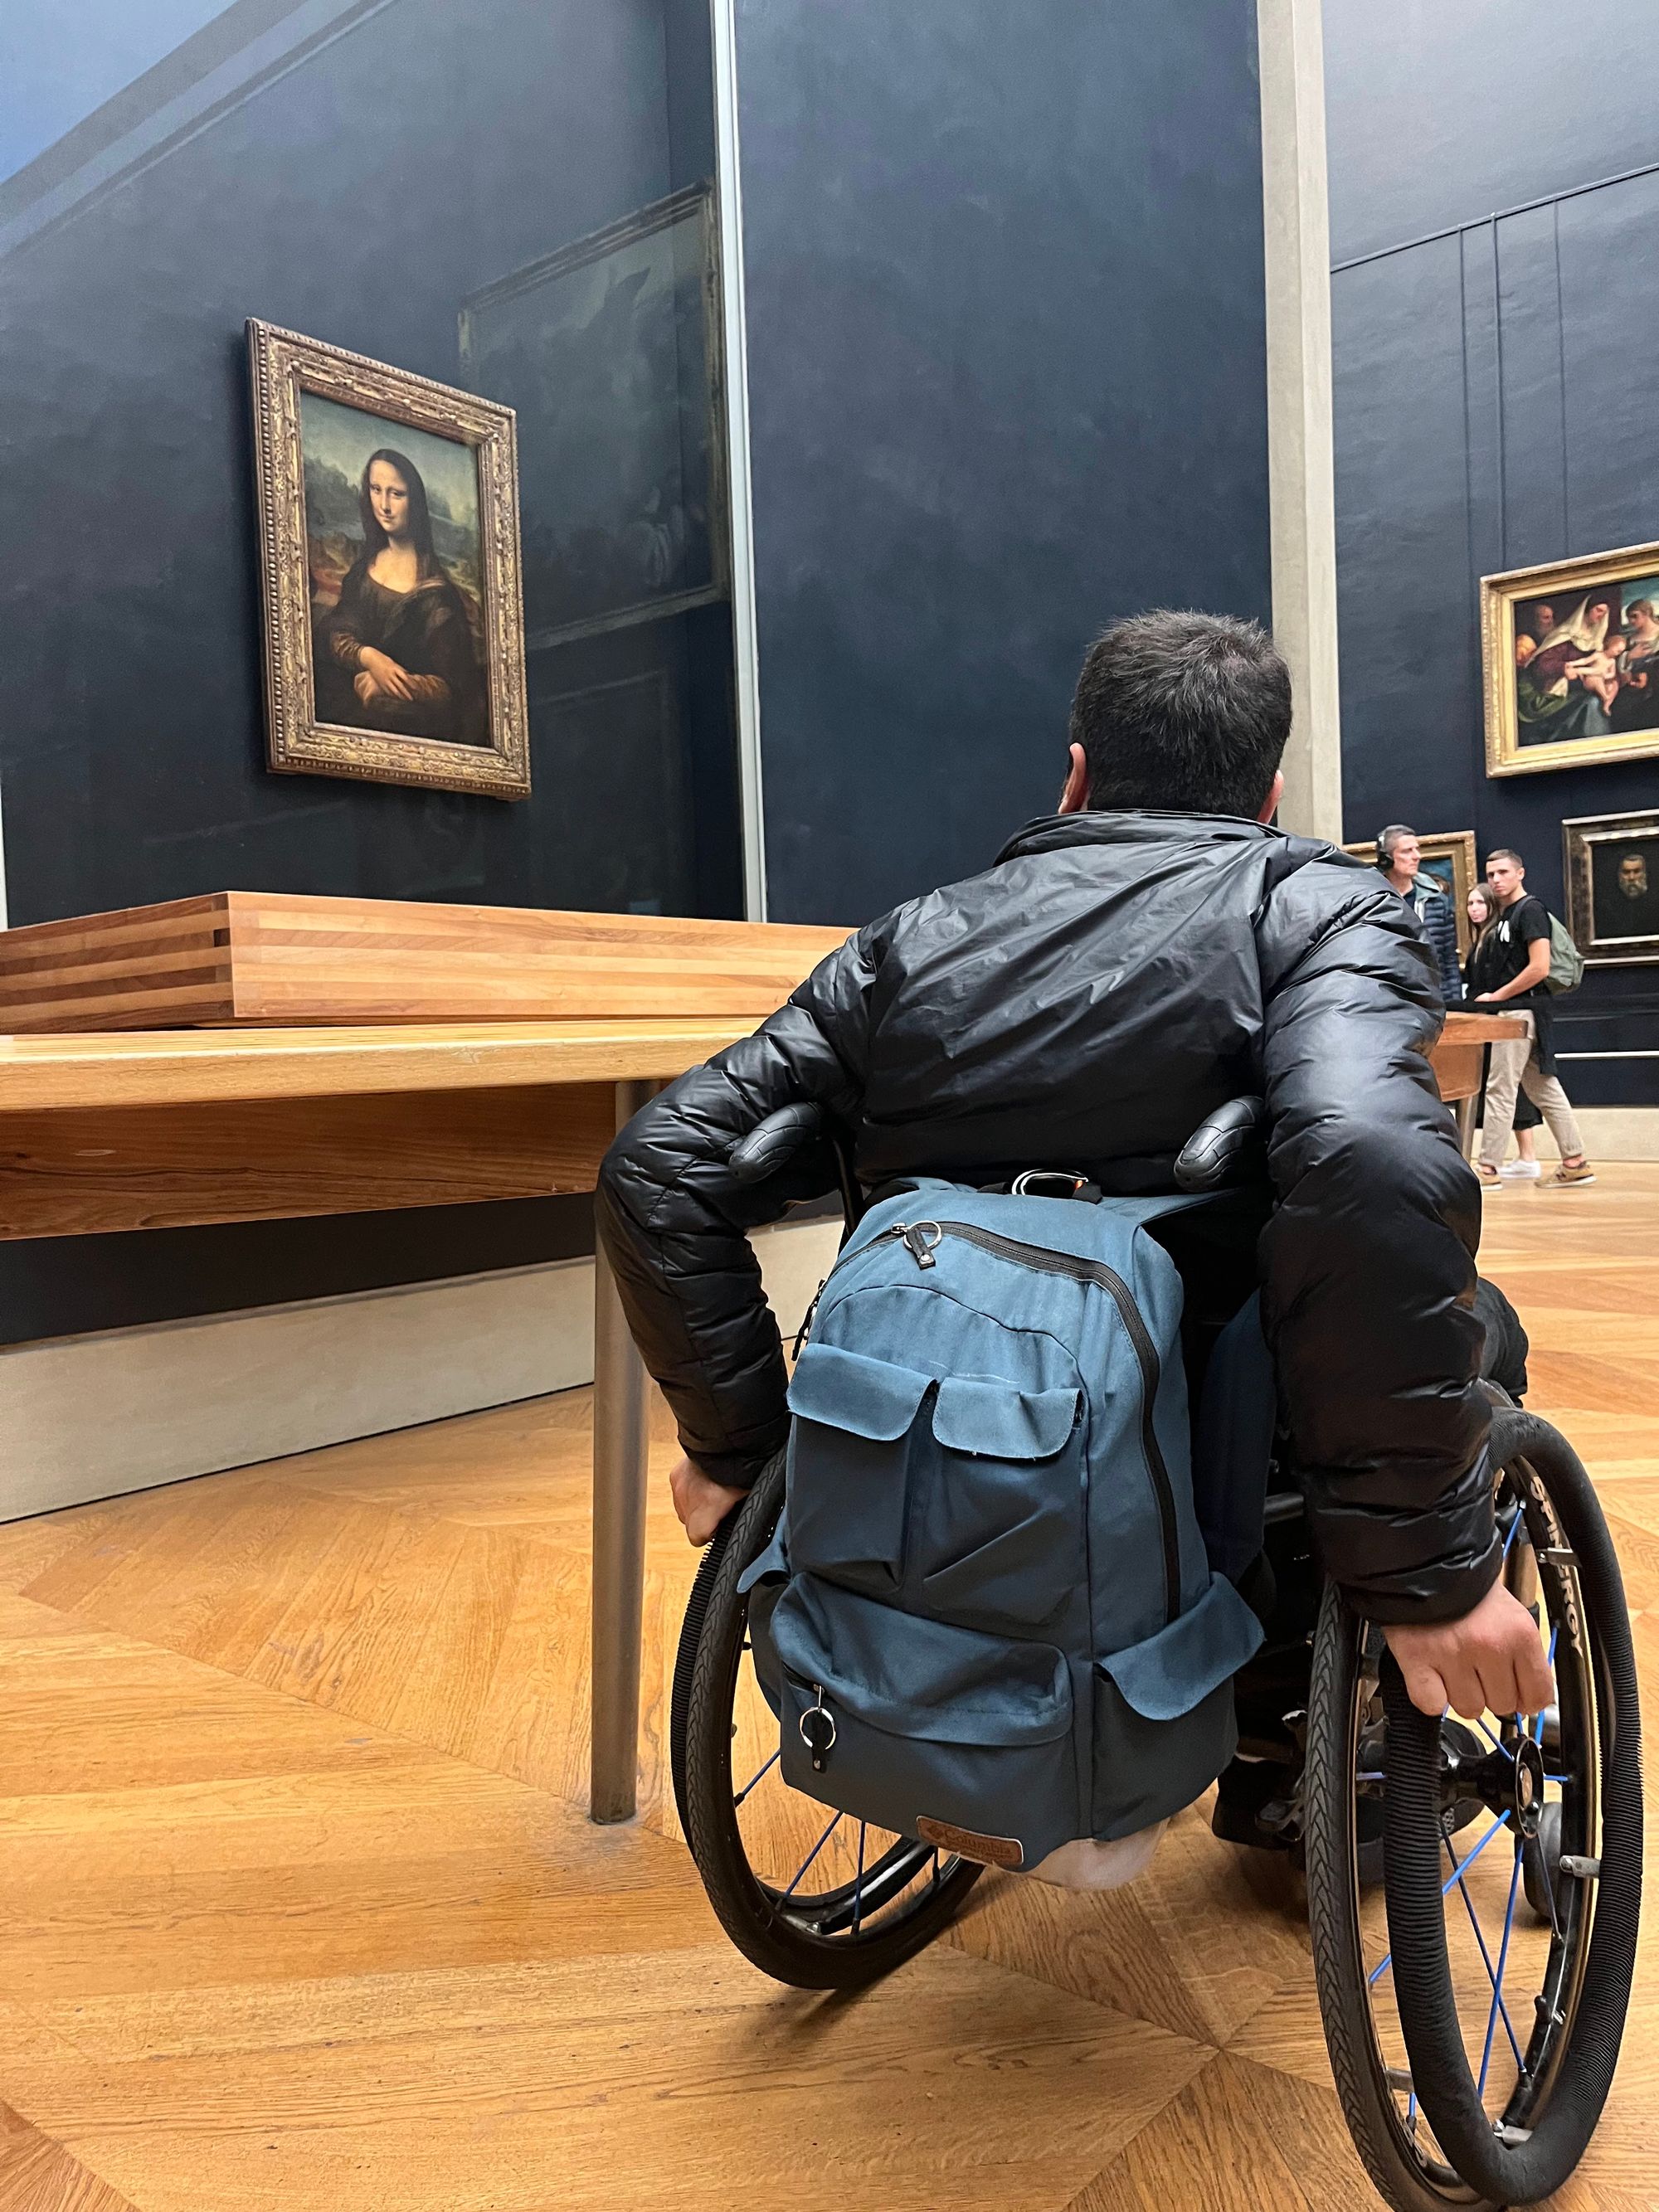 A wheelchair user at the Louvre museum observing the Mona Lisa painting.